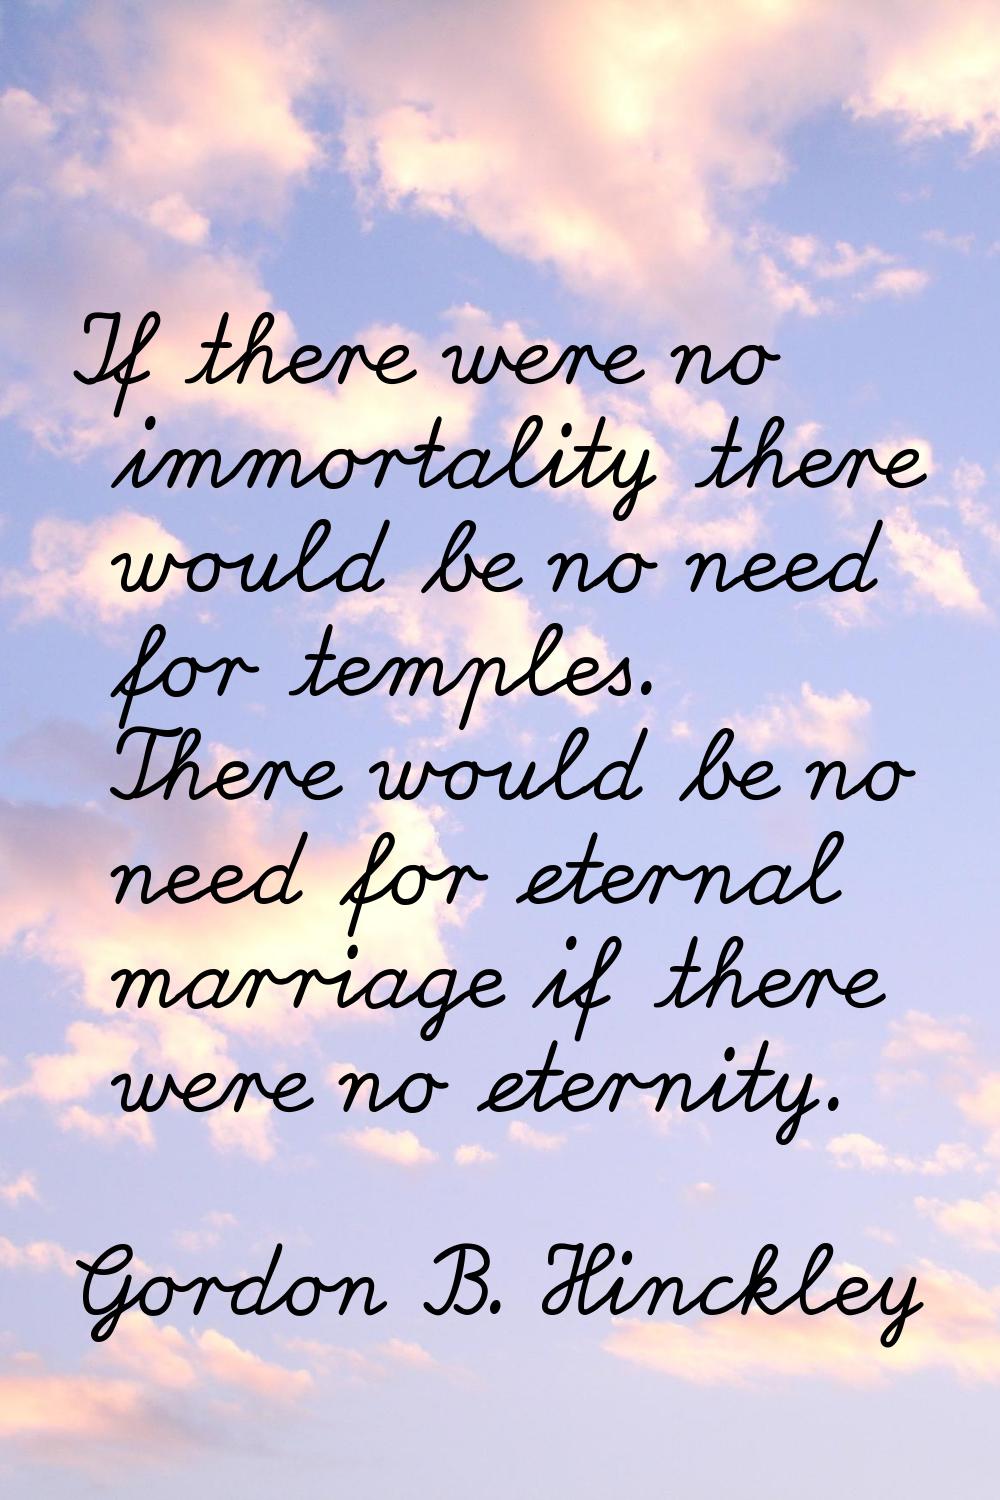 If there were no immortality there would be no need for temples. There would be no need for eternal